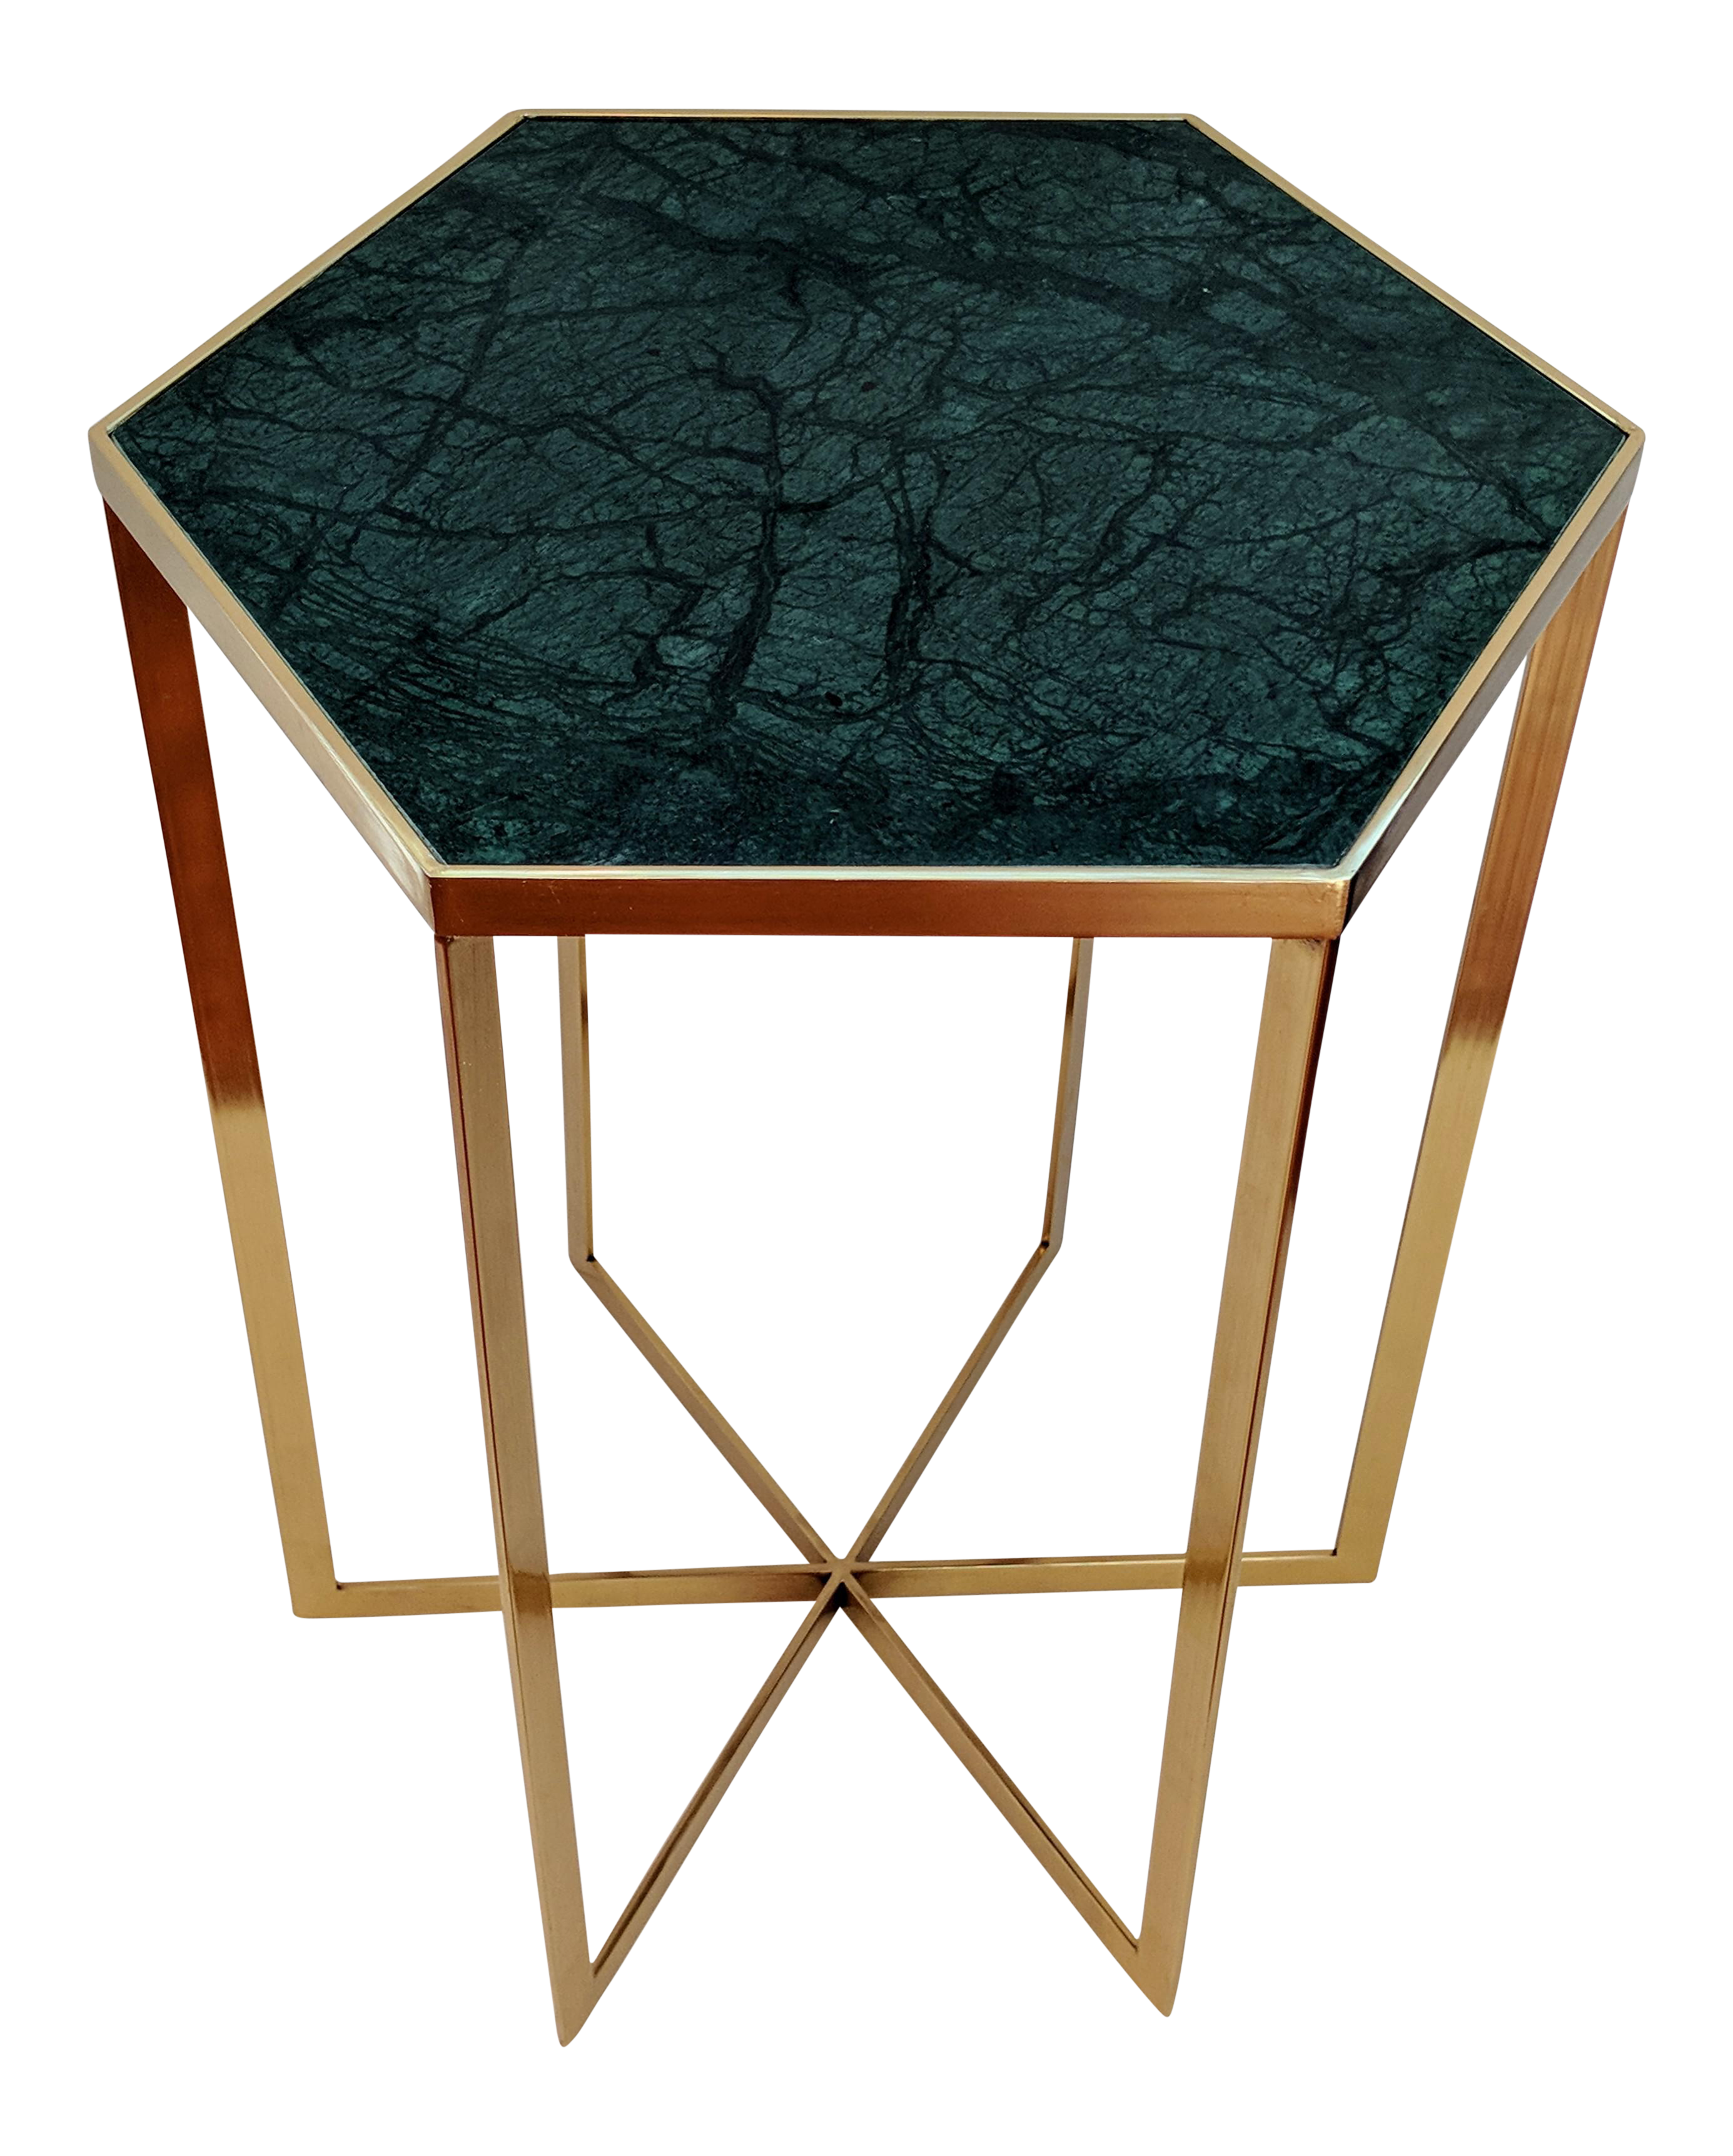 jonathan adler inspired art deco green marble side table with brass base emerald accent chairish decorative wine rack corner storage chest weber grill ikea small bedside legion